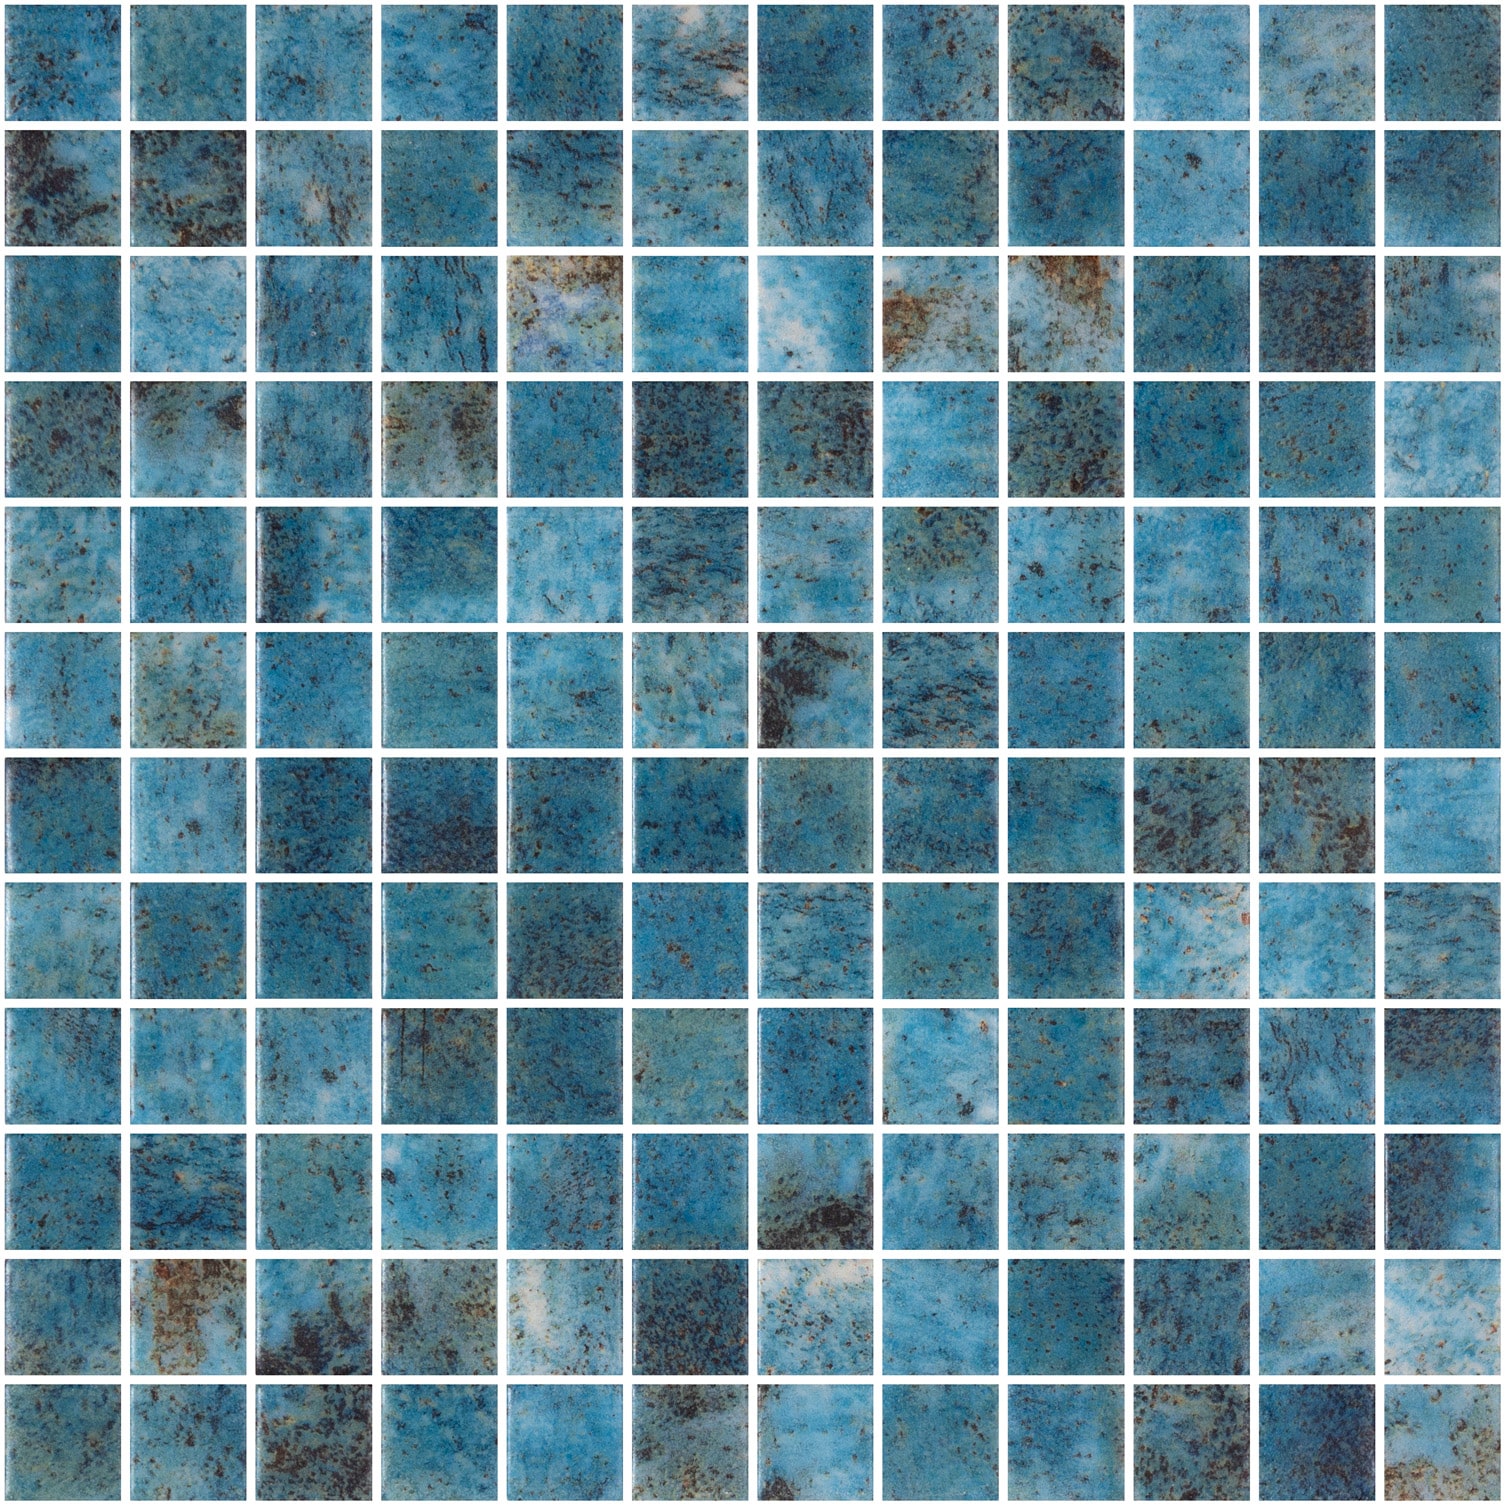 MOANA MATTE_RMS TRADERS_NATURAL STONE POOL MOSAIC SUPPLIER MELBOURNE (1)